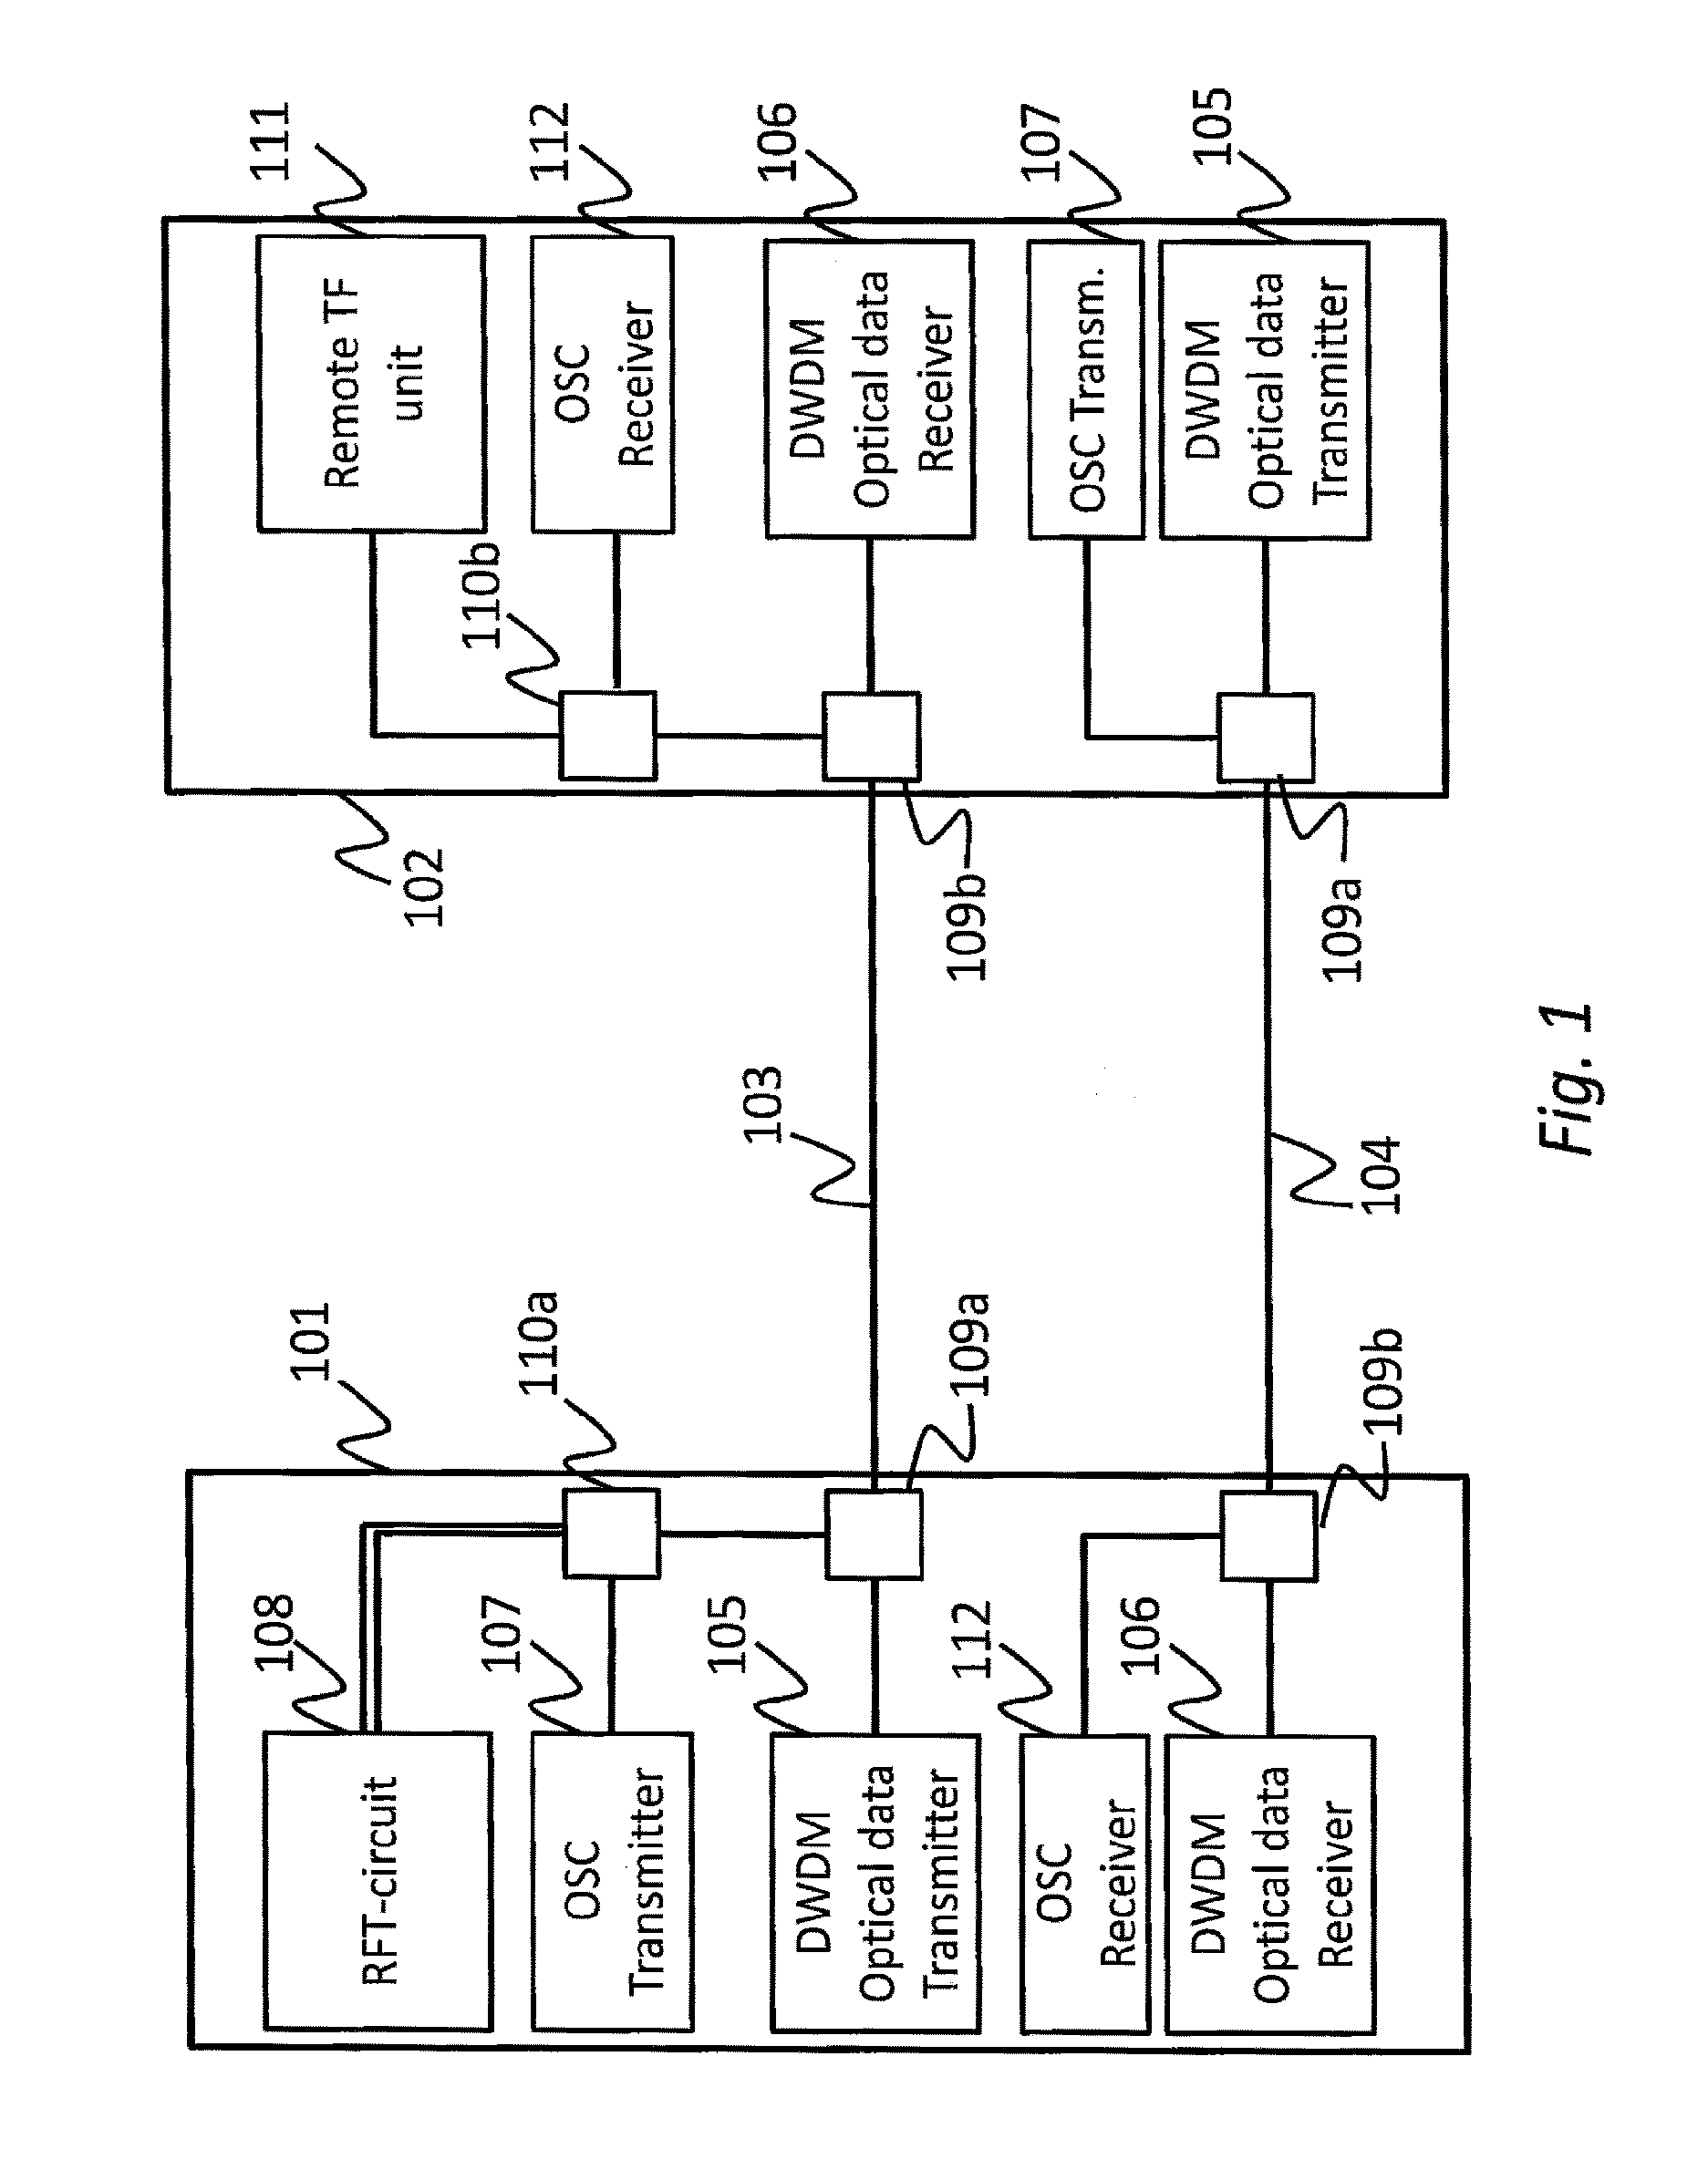 System and method for network synchronization and frequency dissemination